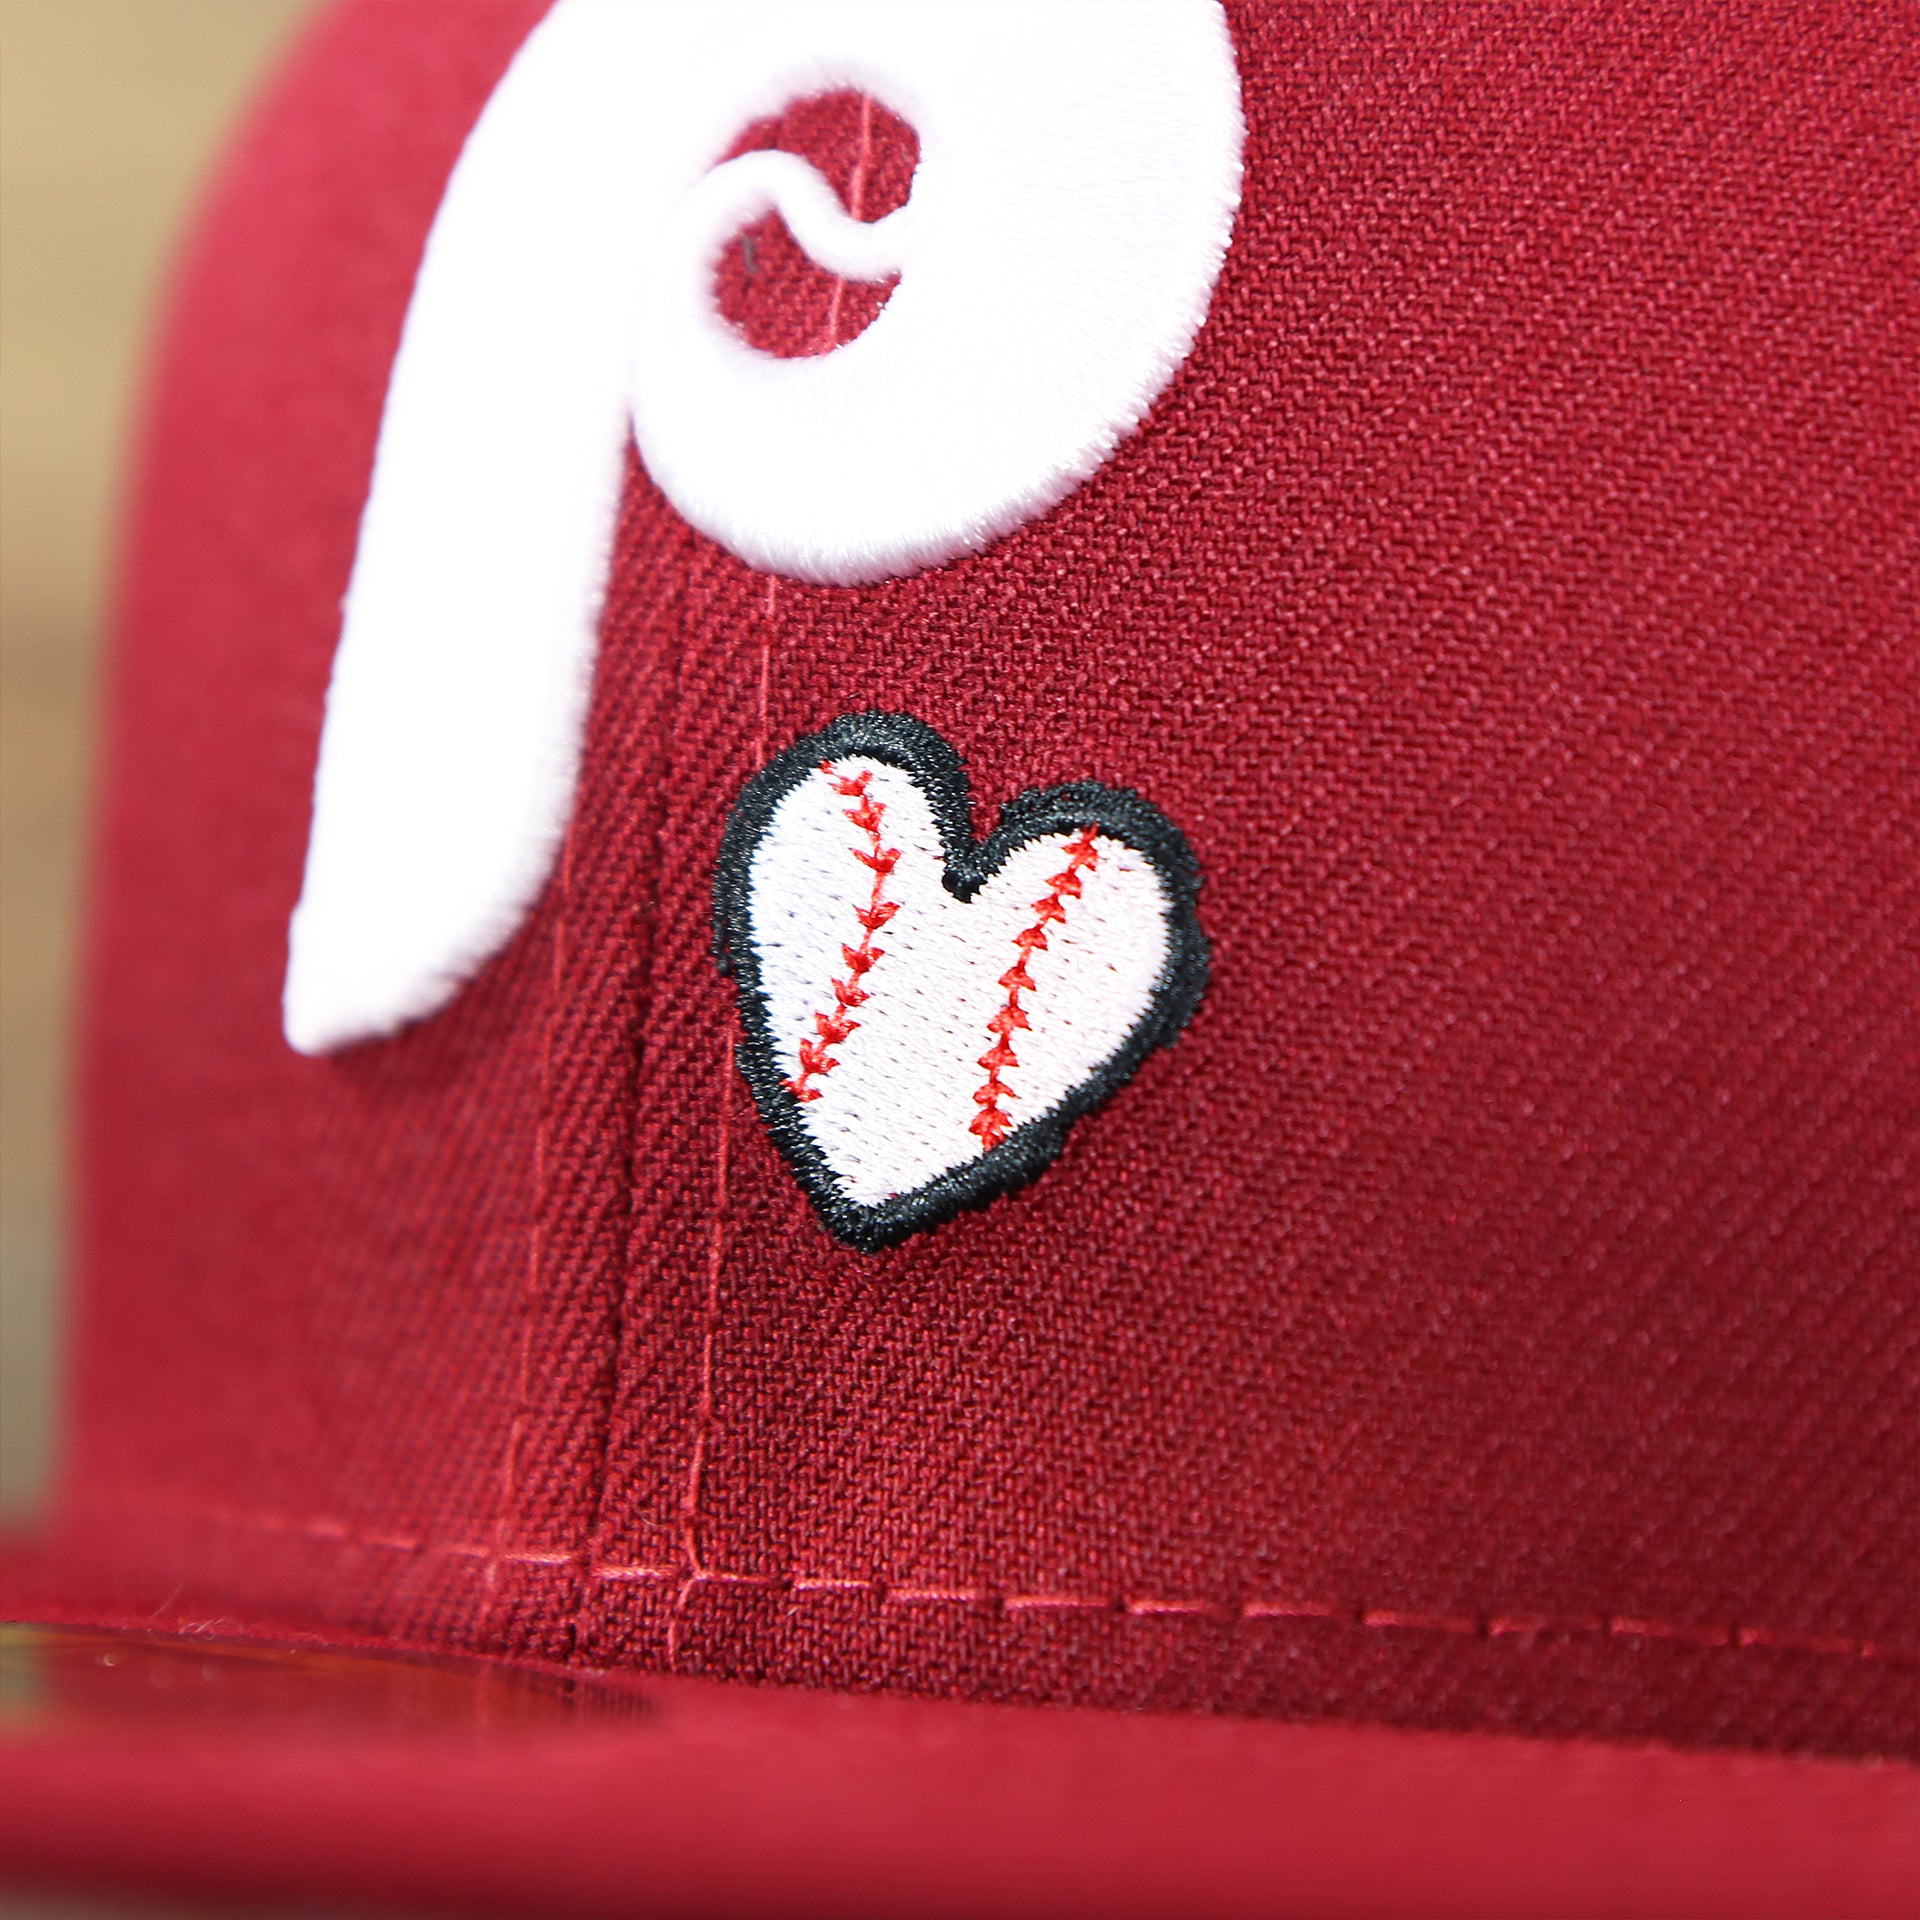 The Baseball Heart on the Cooperstown Philadelphia Phillies Baseball Heart Gray Bottom World Series 59Fifty Fitted Cap | Maroon 59Fifty Cap